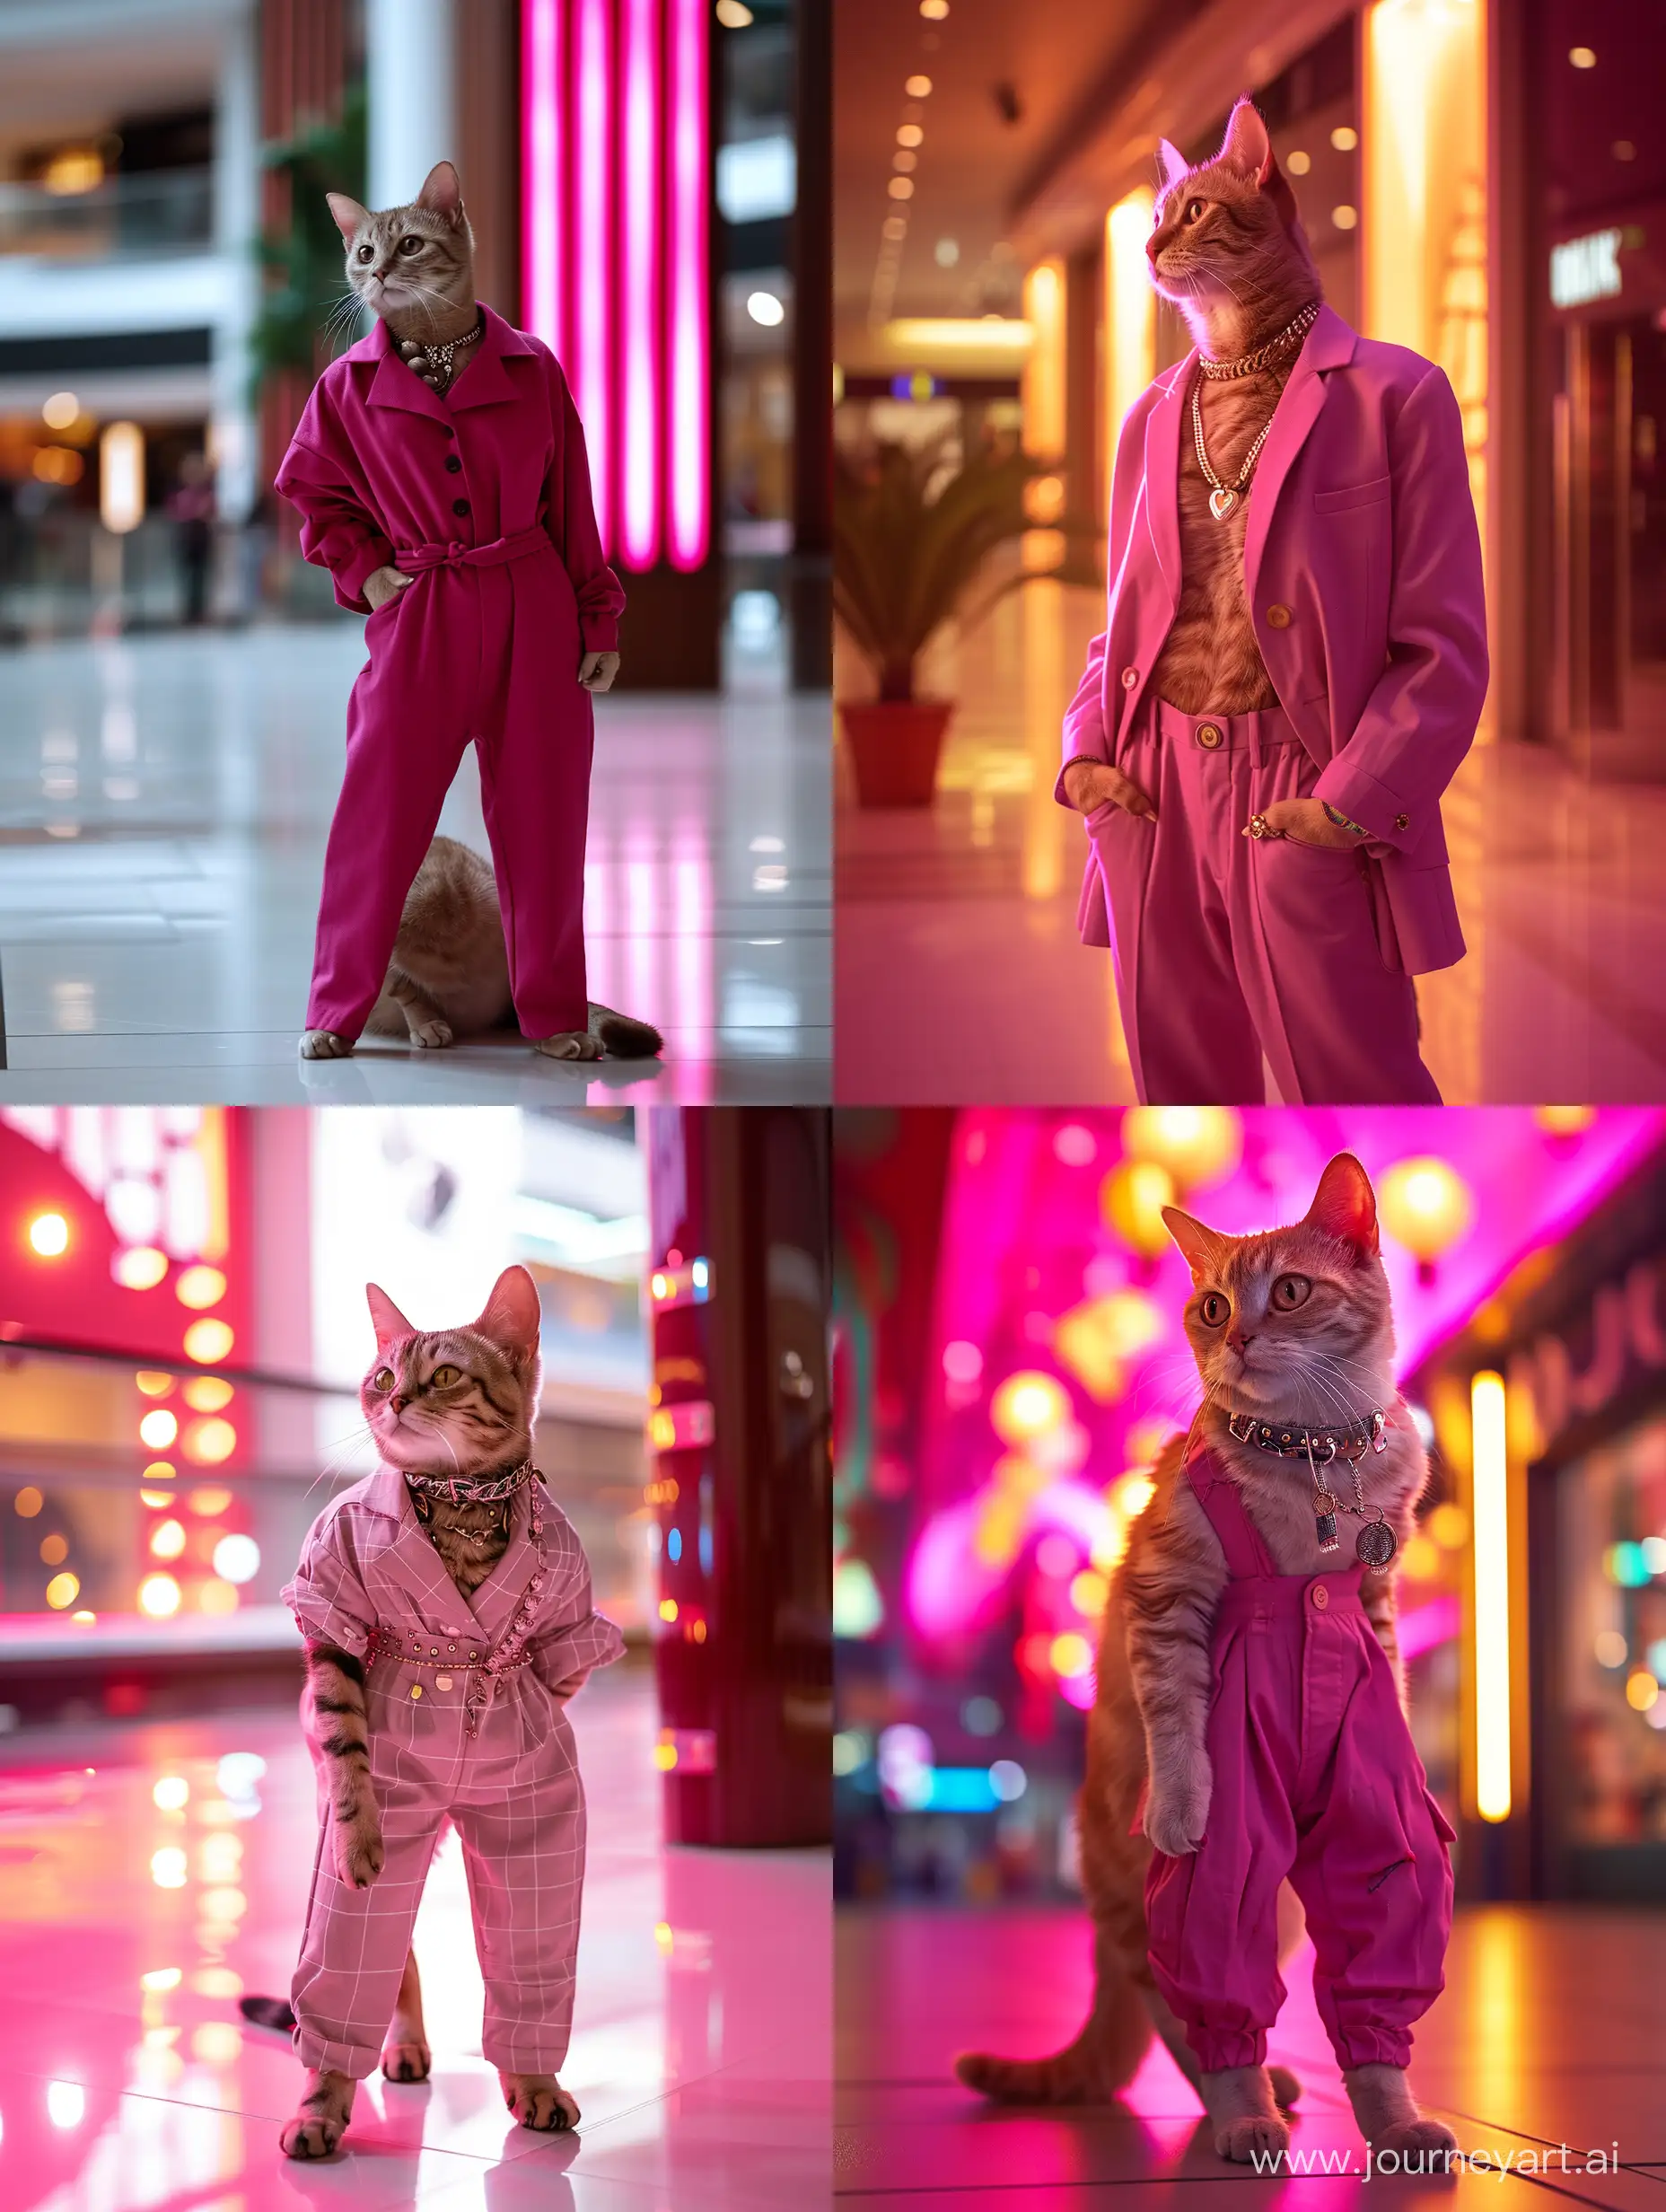 A cat in fashionable clothes Standing in the mall, in the style of glamorous hollywood portraits, light magenta and pink, 32k uhd, deconstructed hot pants tailoring, dramatic lighting effects, nyfw-inspired, modern jewelry 